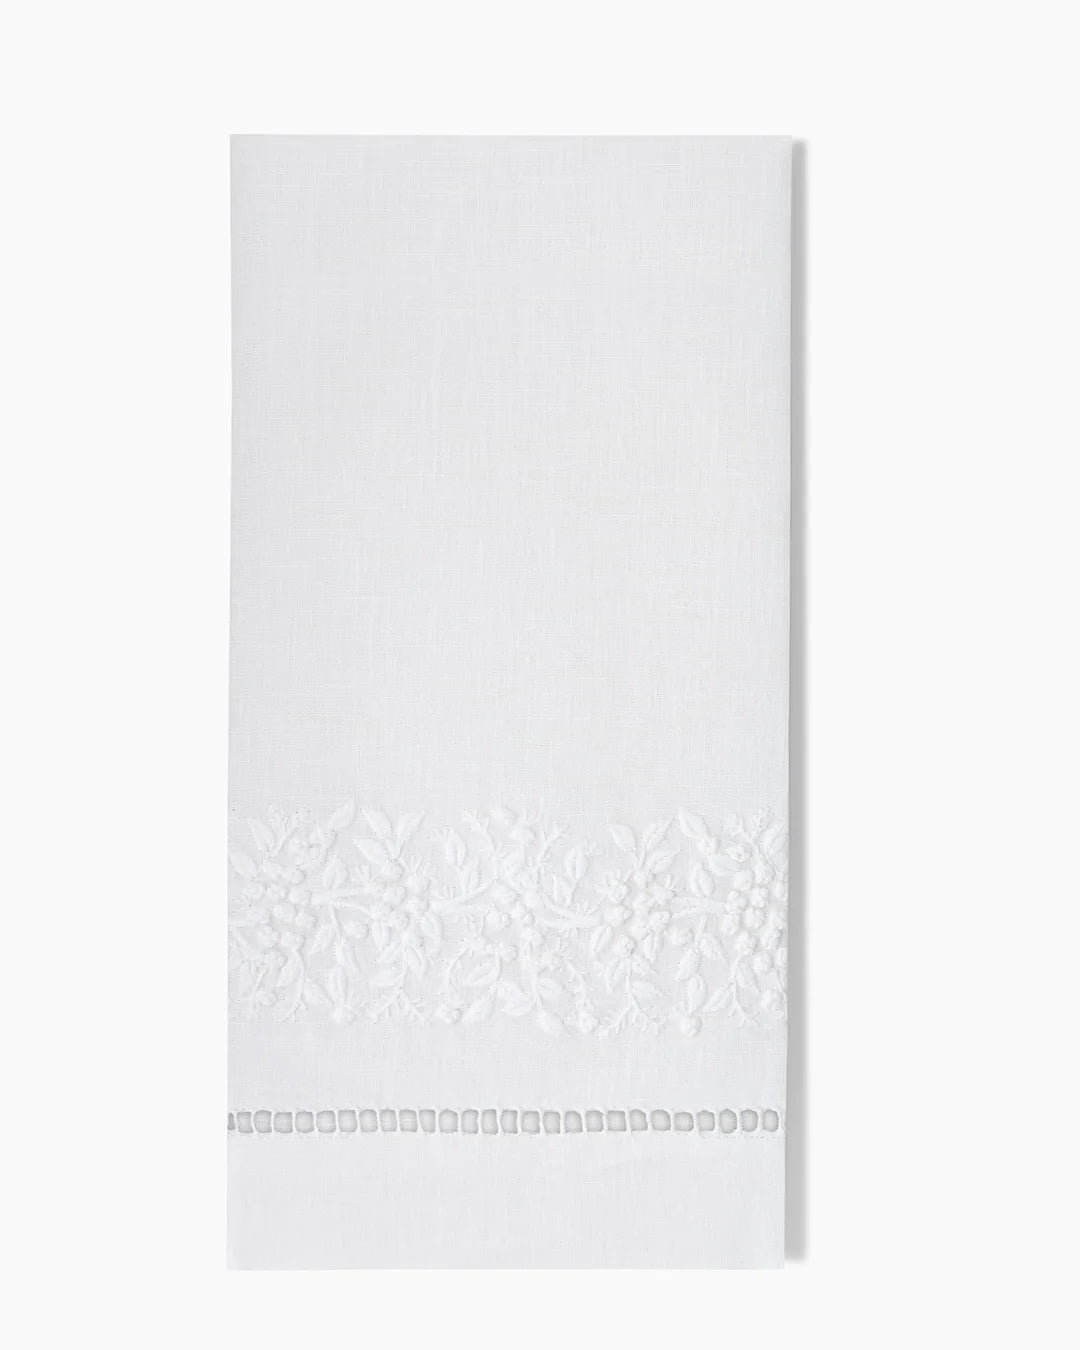 Jardin Classic Linen Hand Towels in White, Set of Two